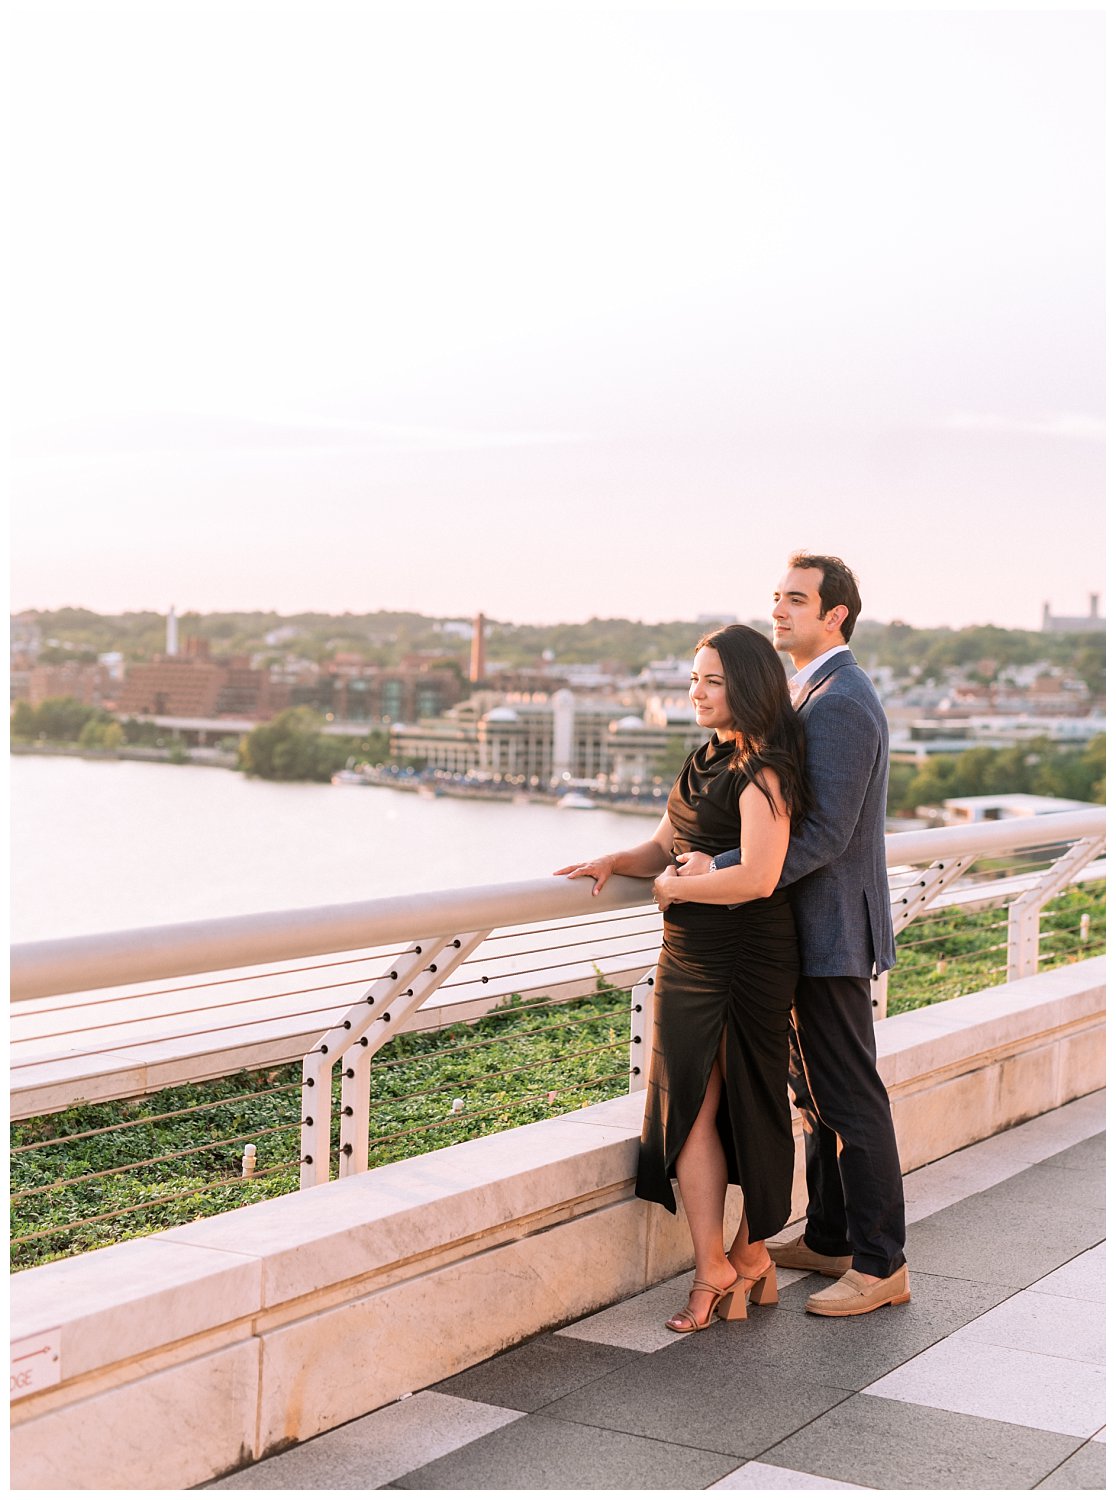 Sunset date night engagement session at the Kennedy Center in Washington, DC.